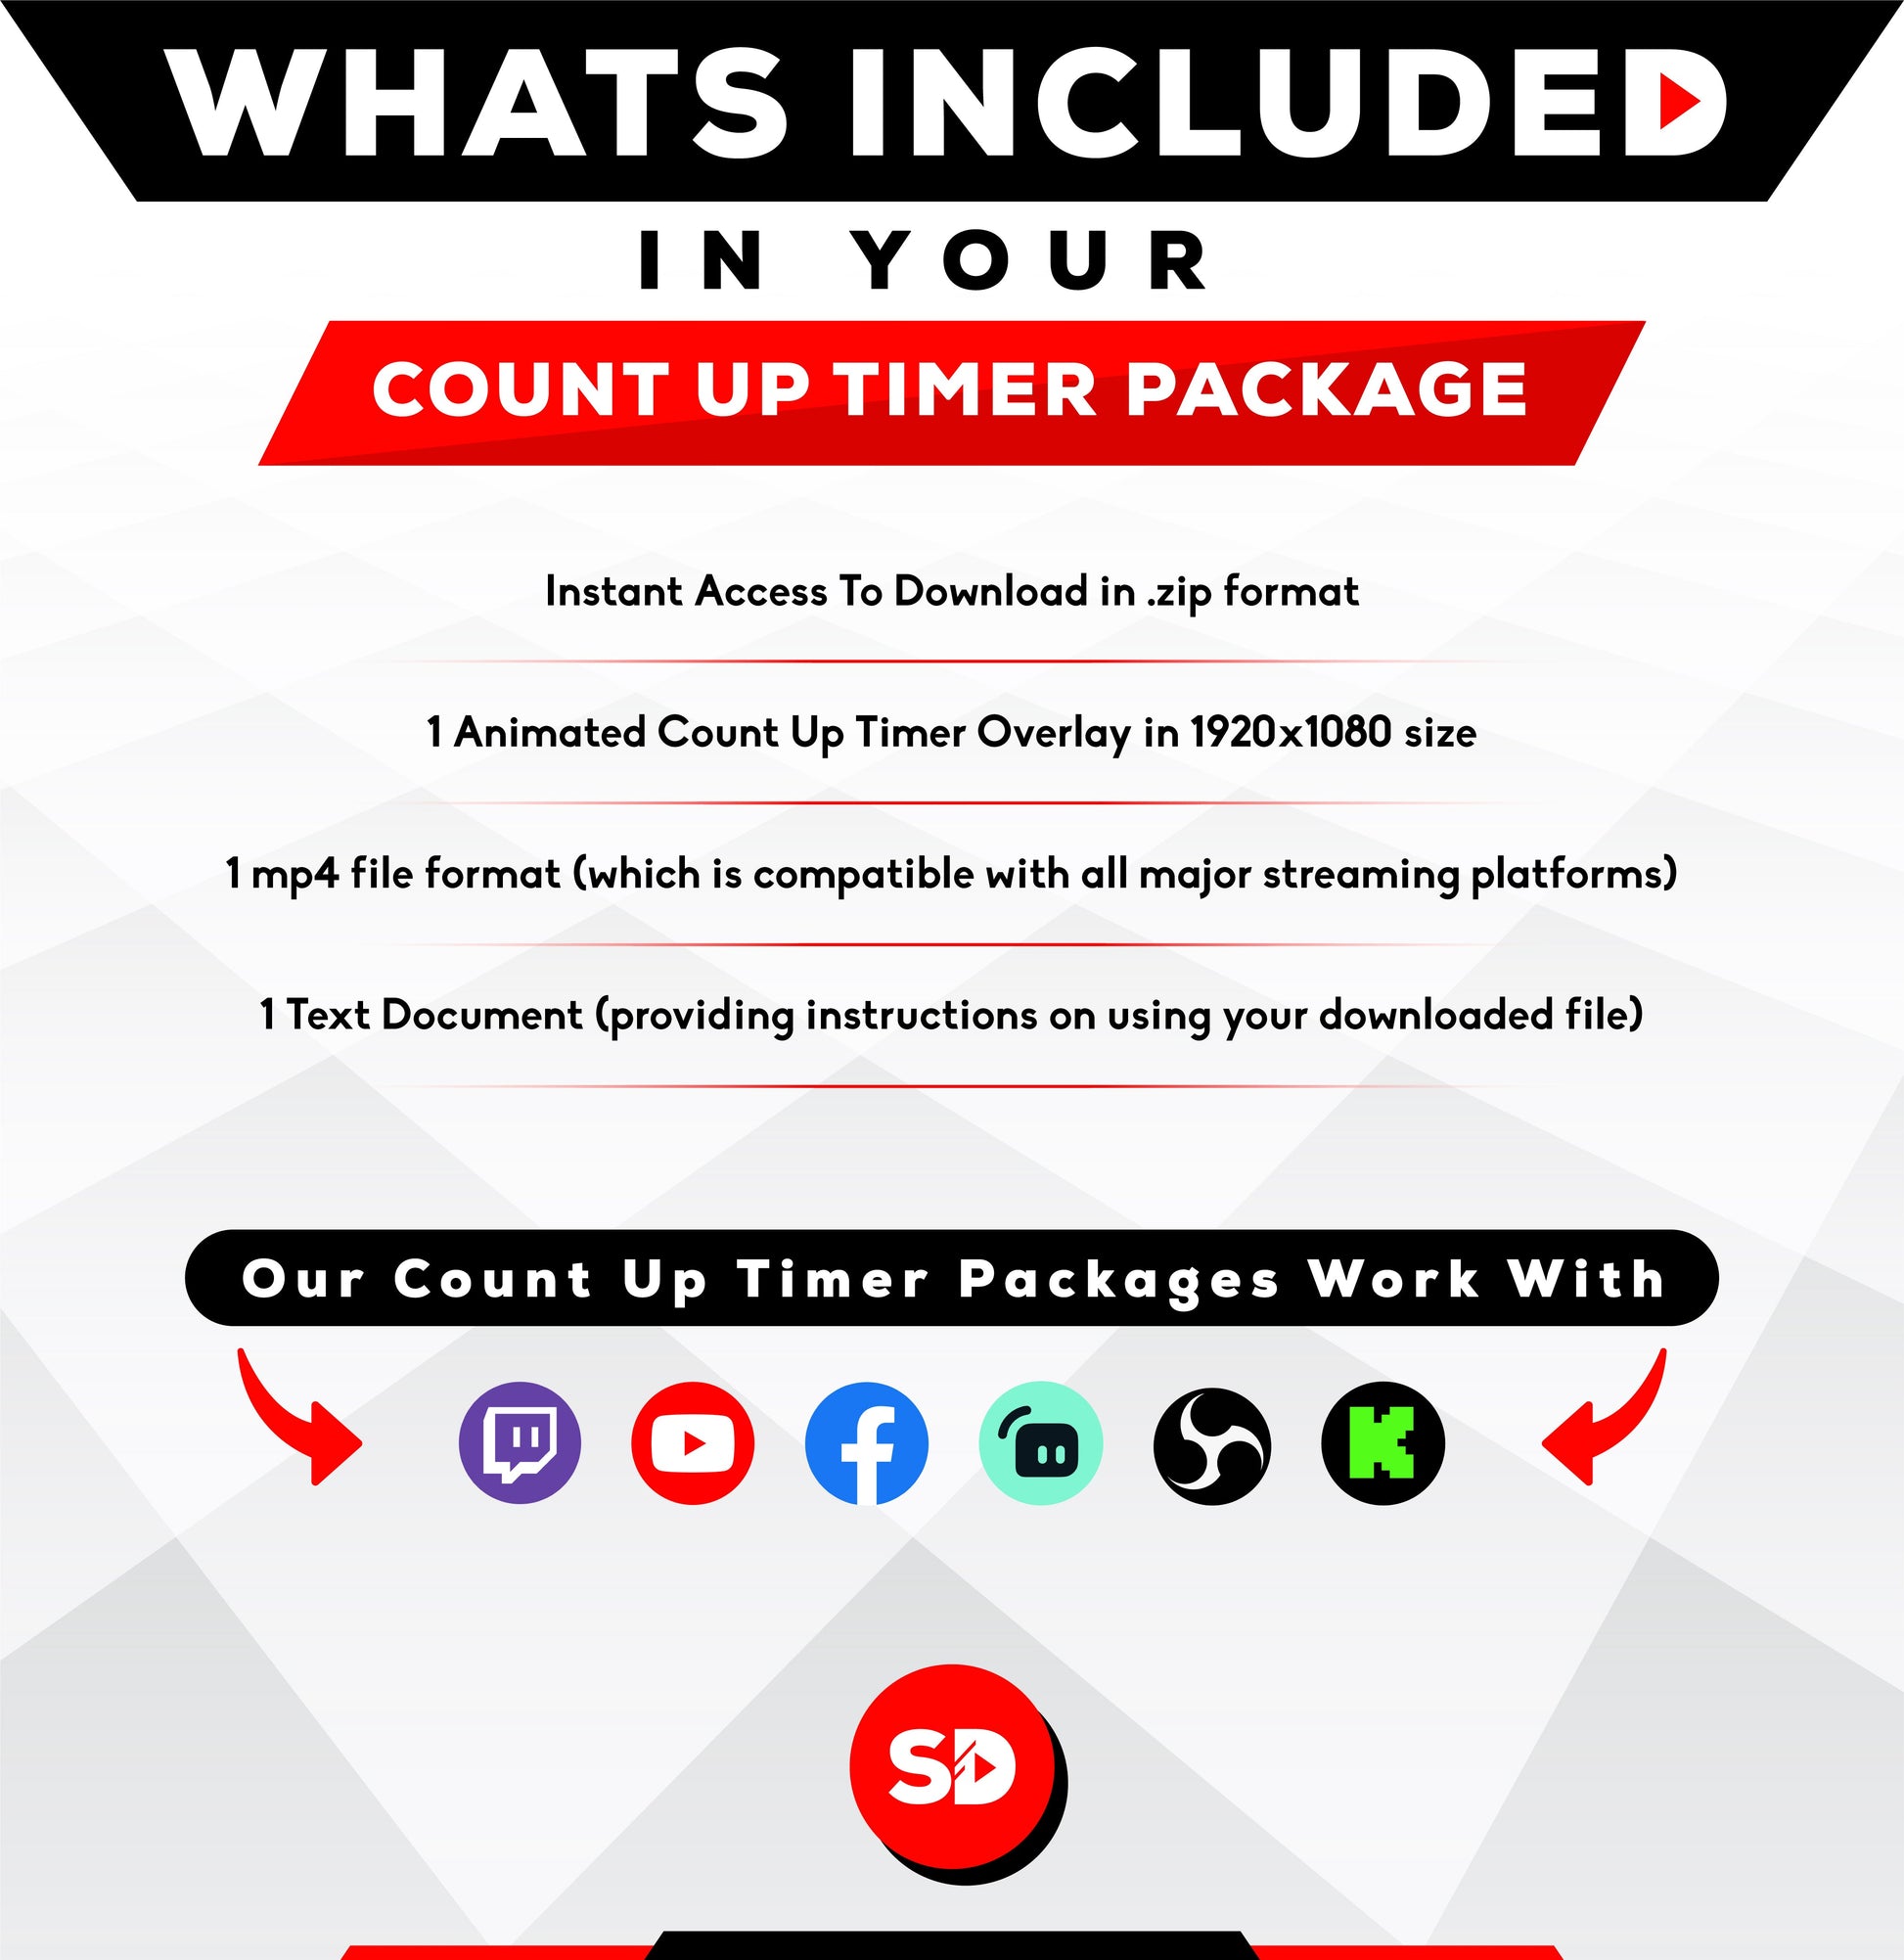 whats included in your package - 5 minute count up timer thumbnail - code red - stream designz